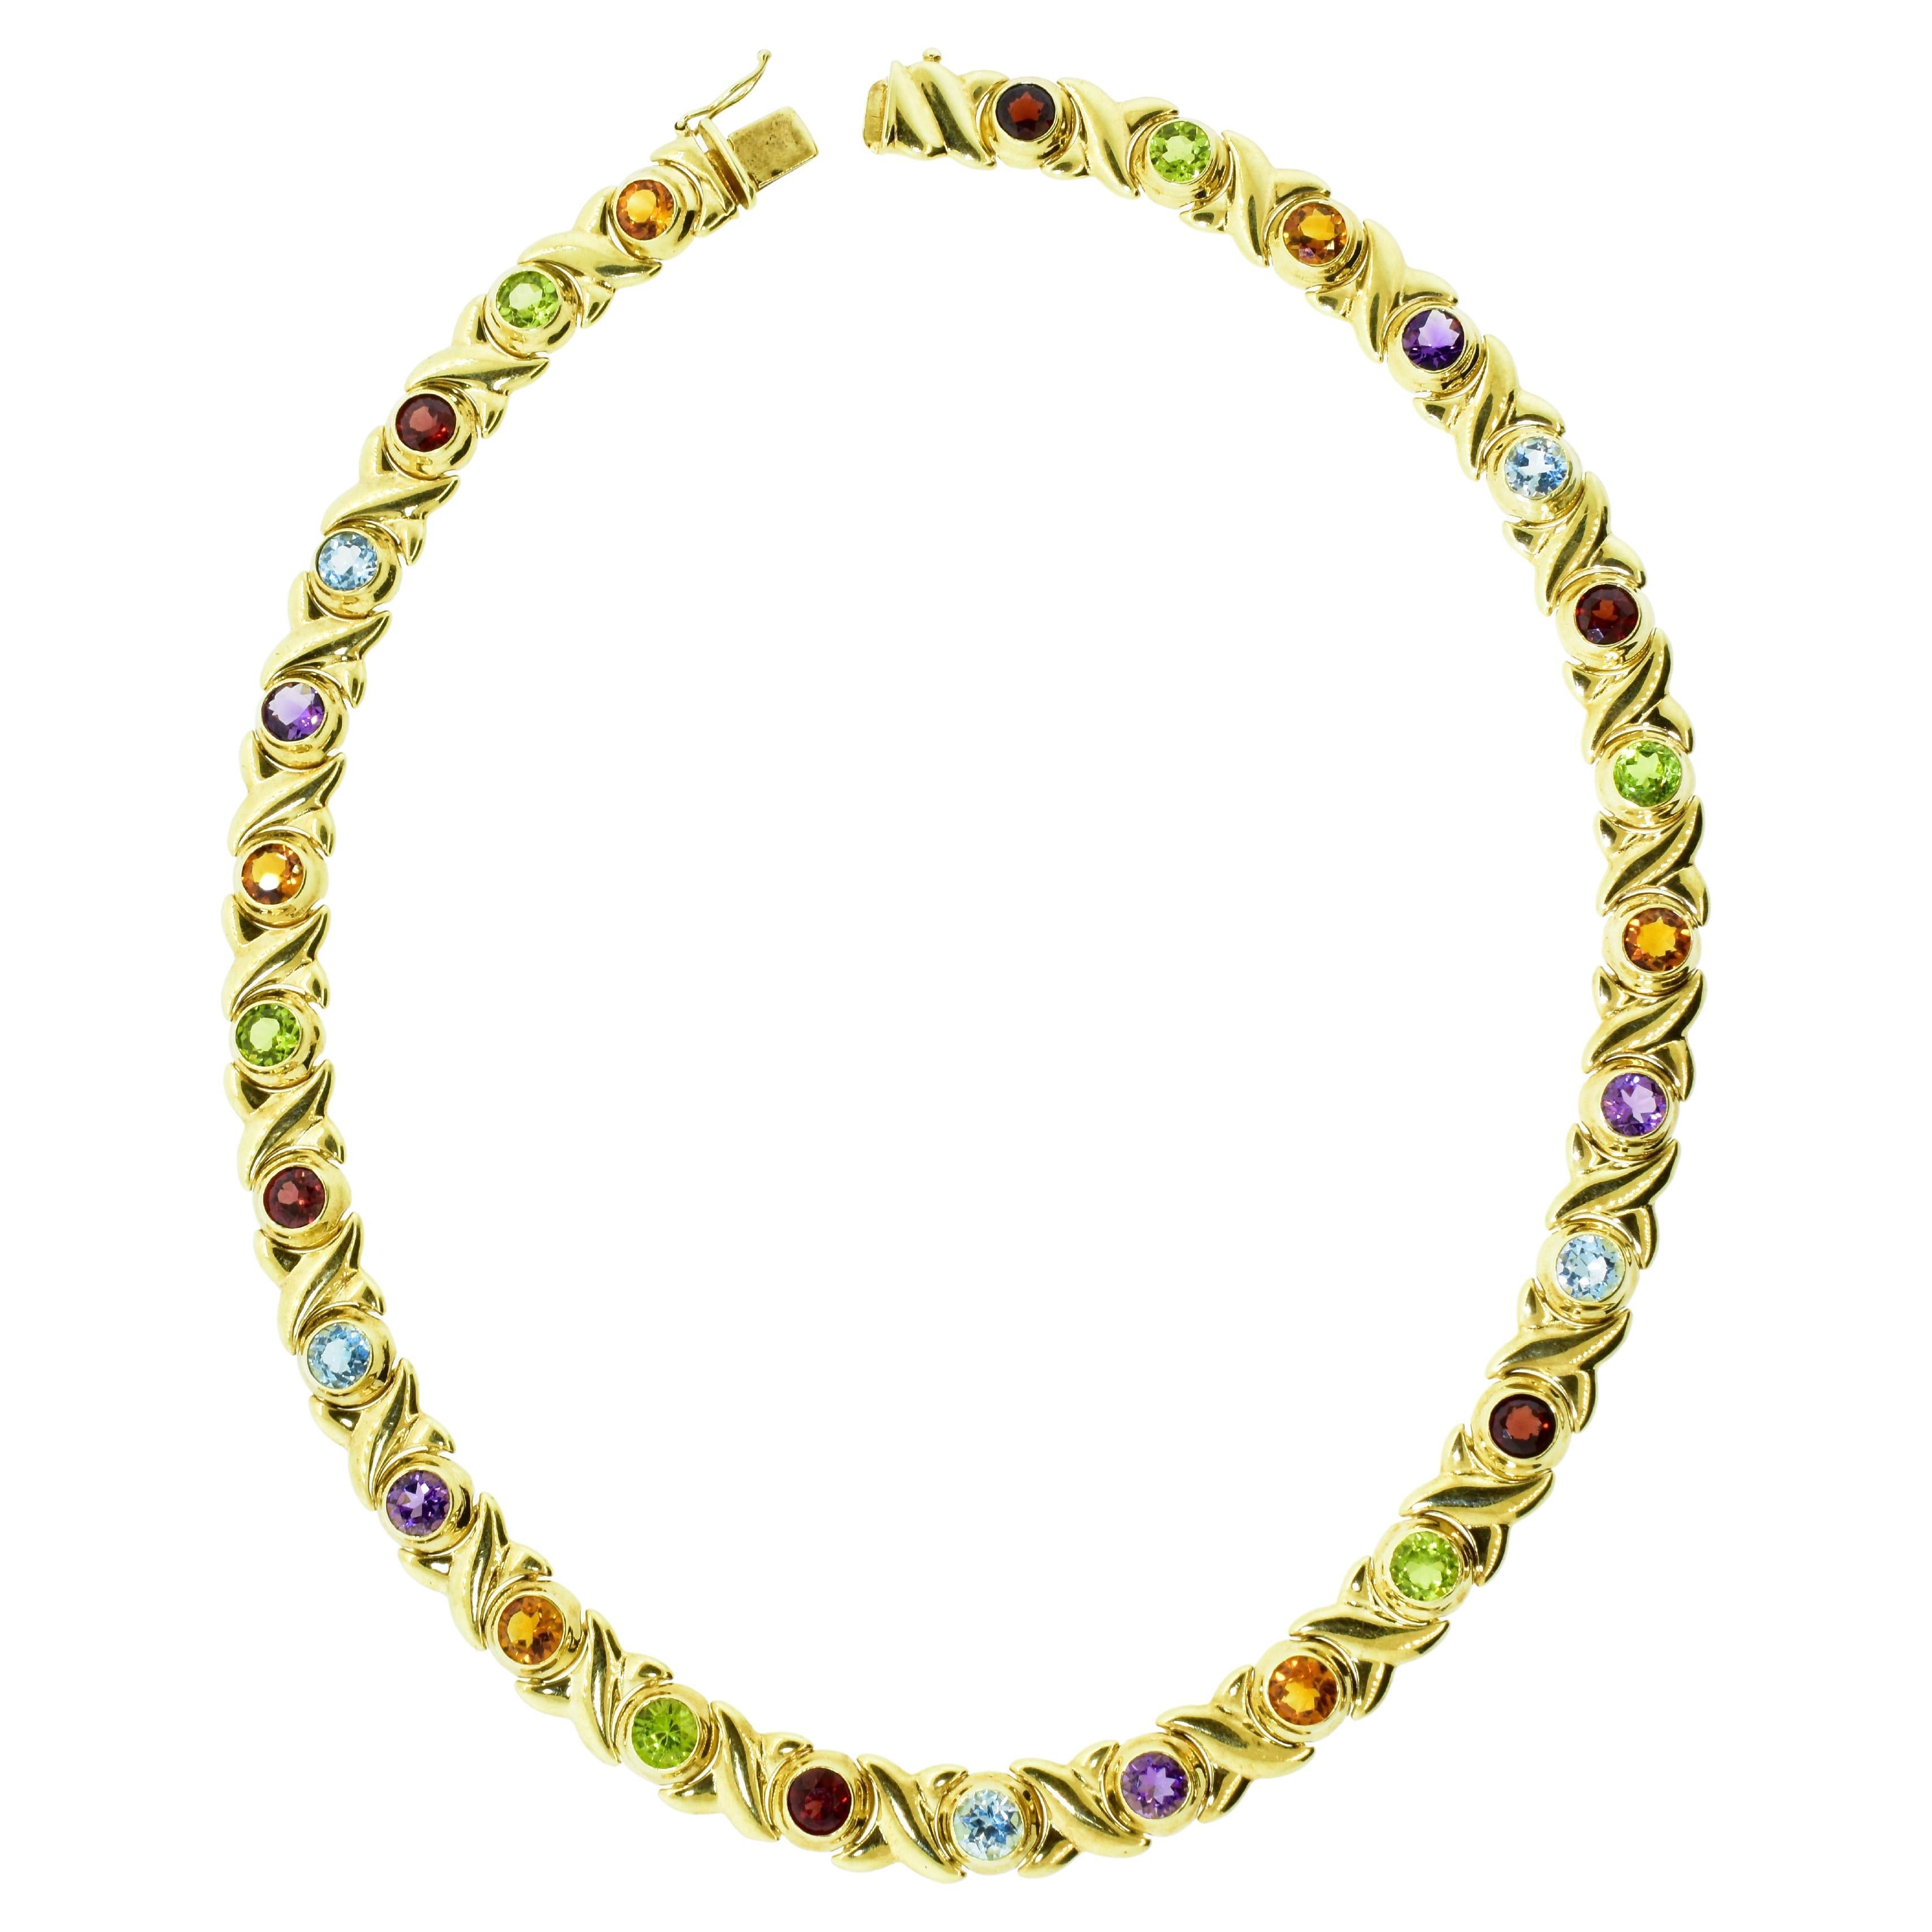 Gem Set Yellow Gold Vintage Necklace with Peridot, Amethyst, Citrine, and Garnet For Sale